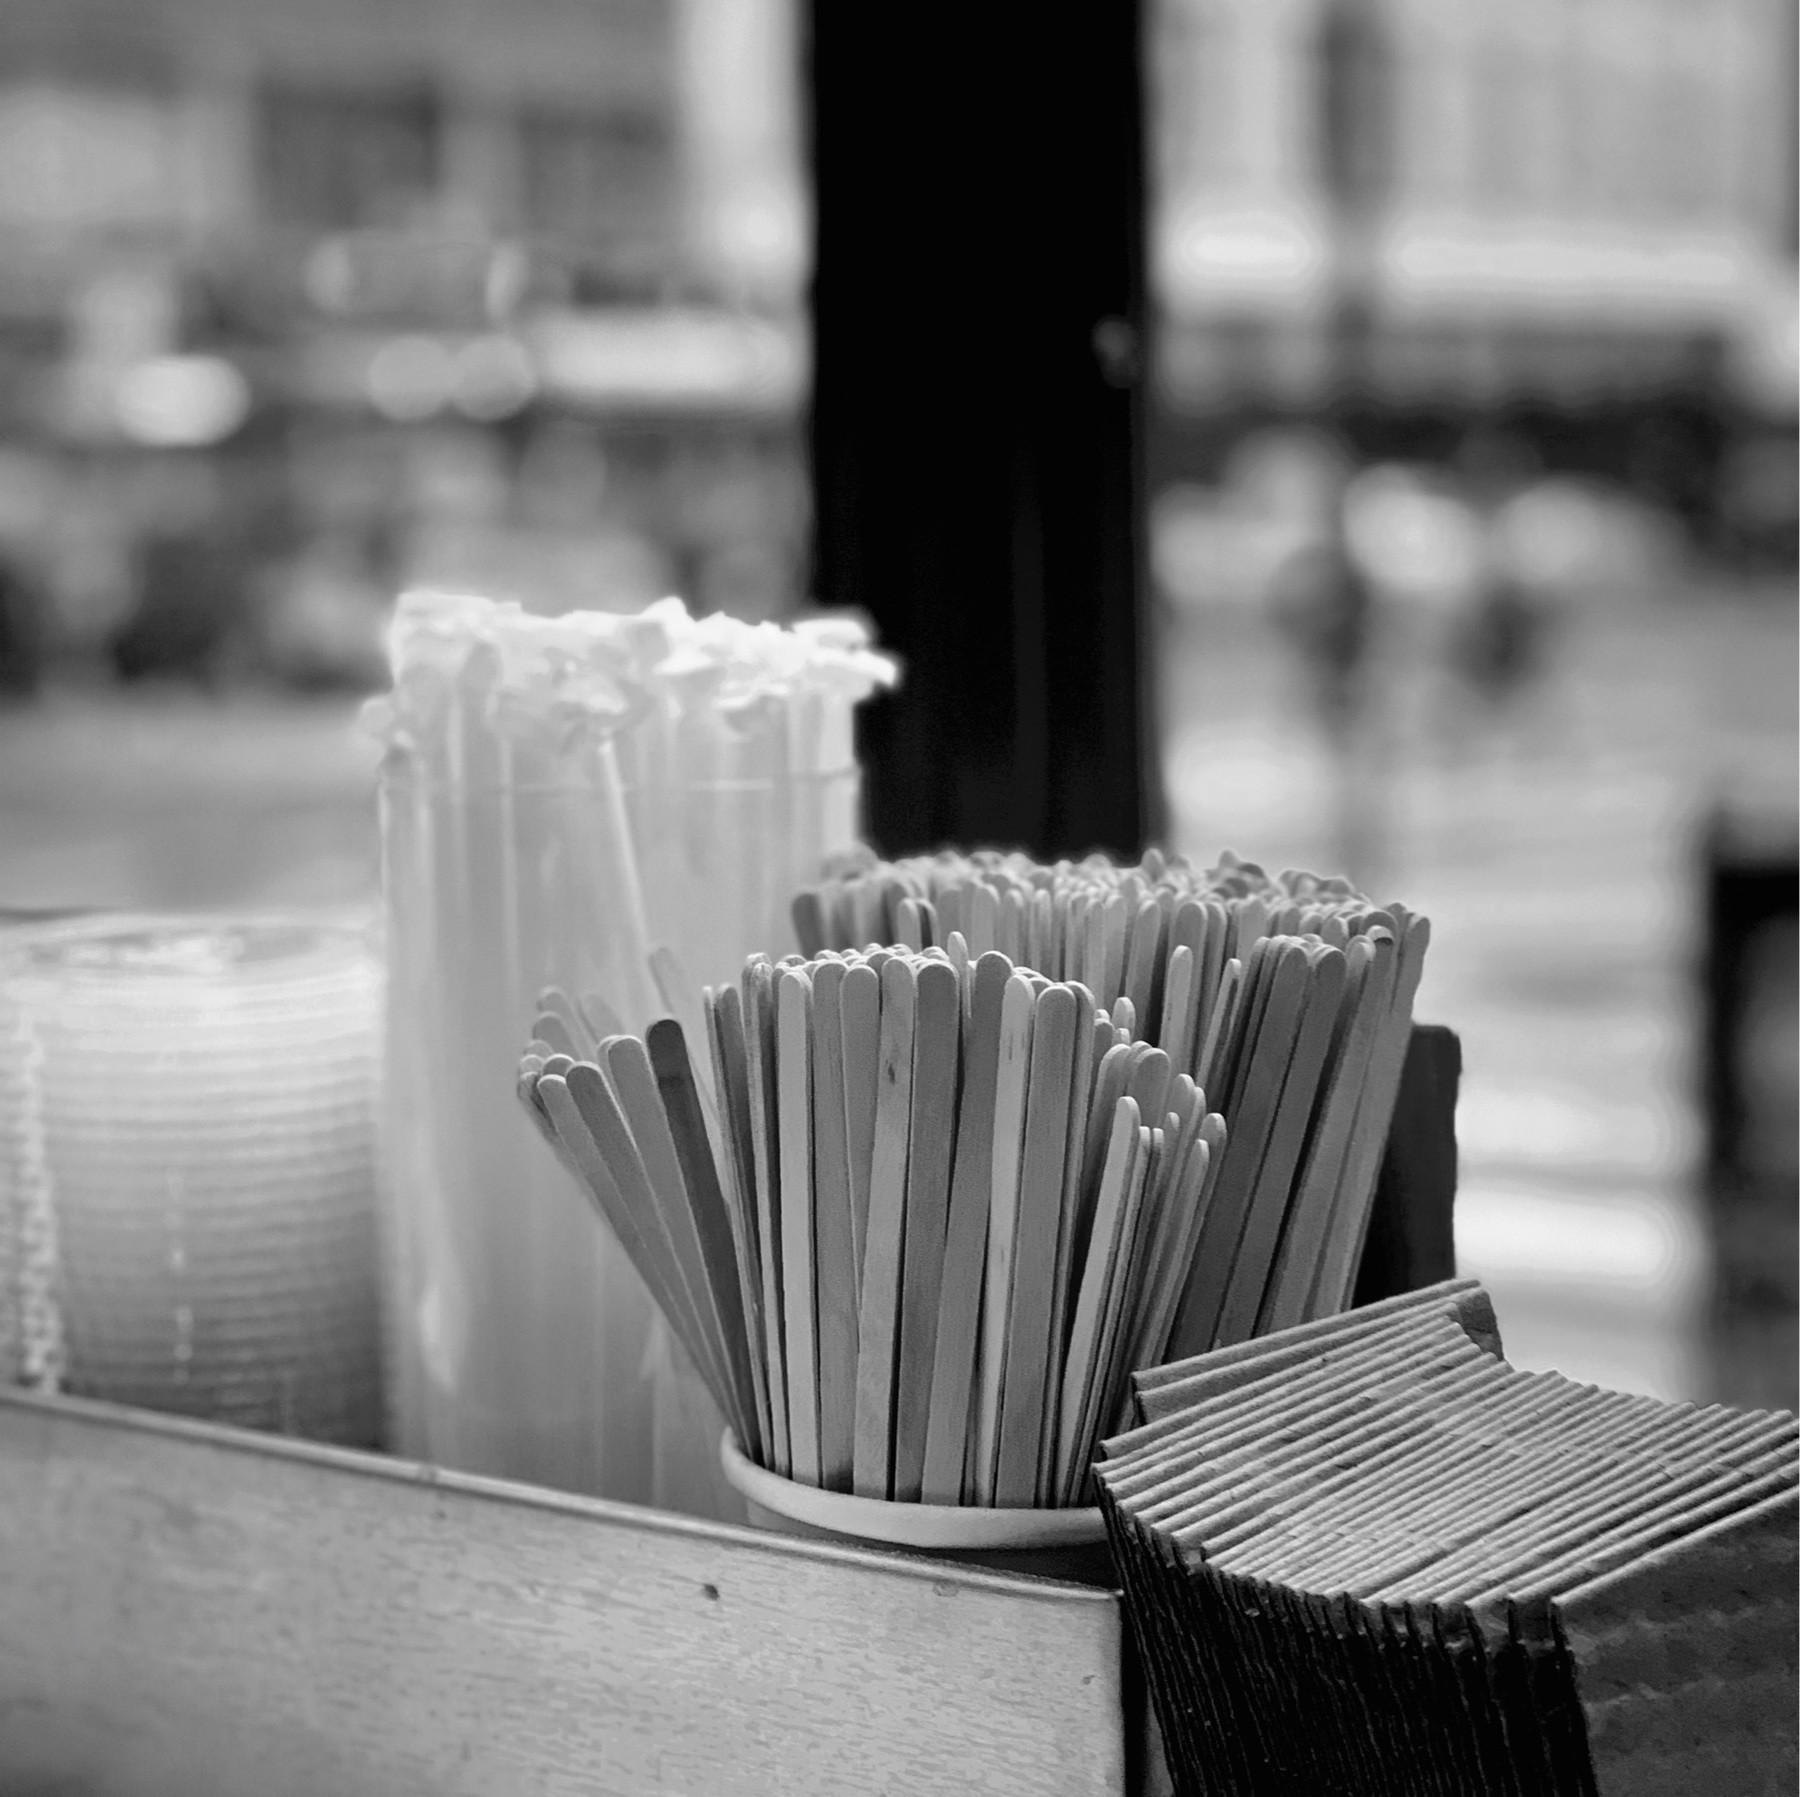 Straws and stirrers in a cafe window.